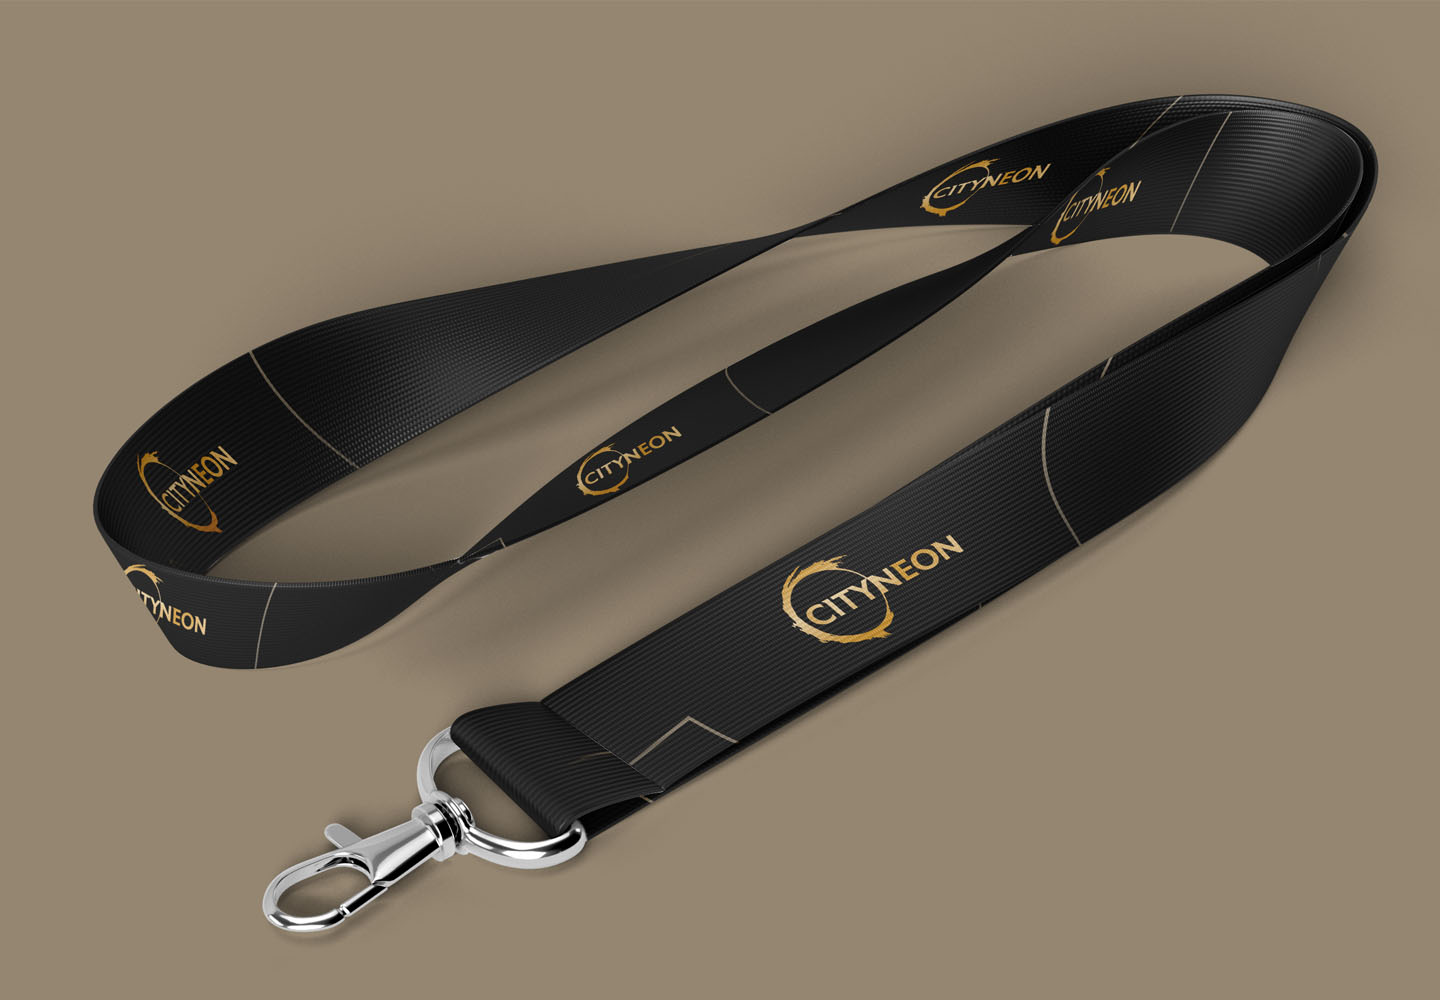 Brand Consultancy in Arts and Entertainment Industry. Lanyard Design for Cityneon